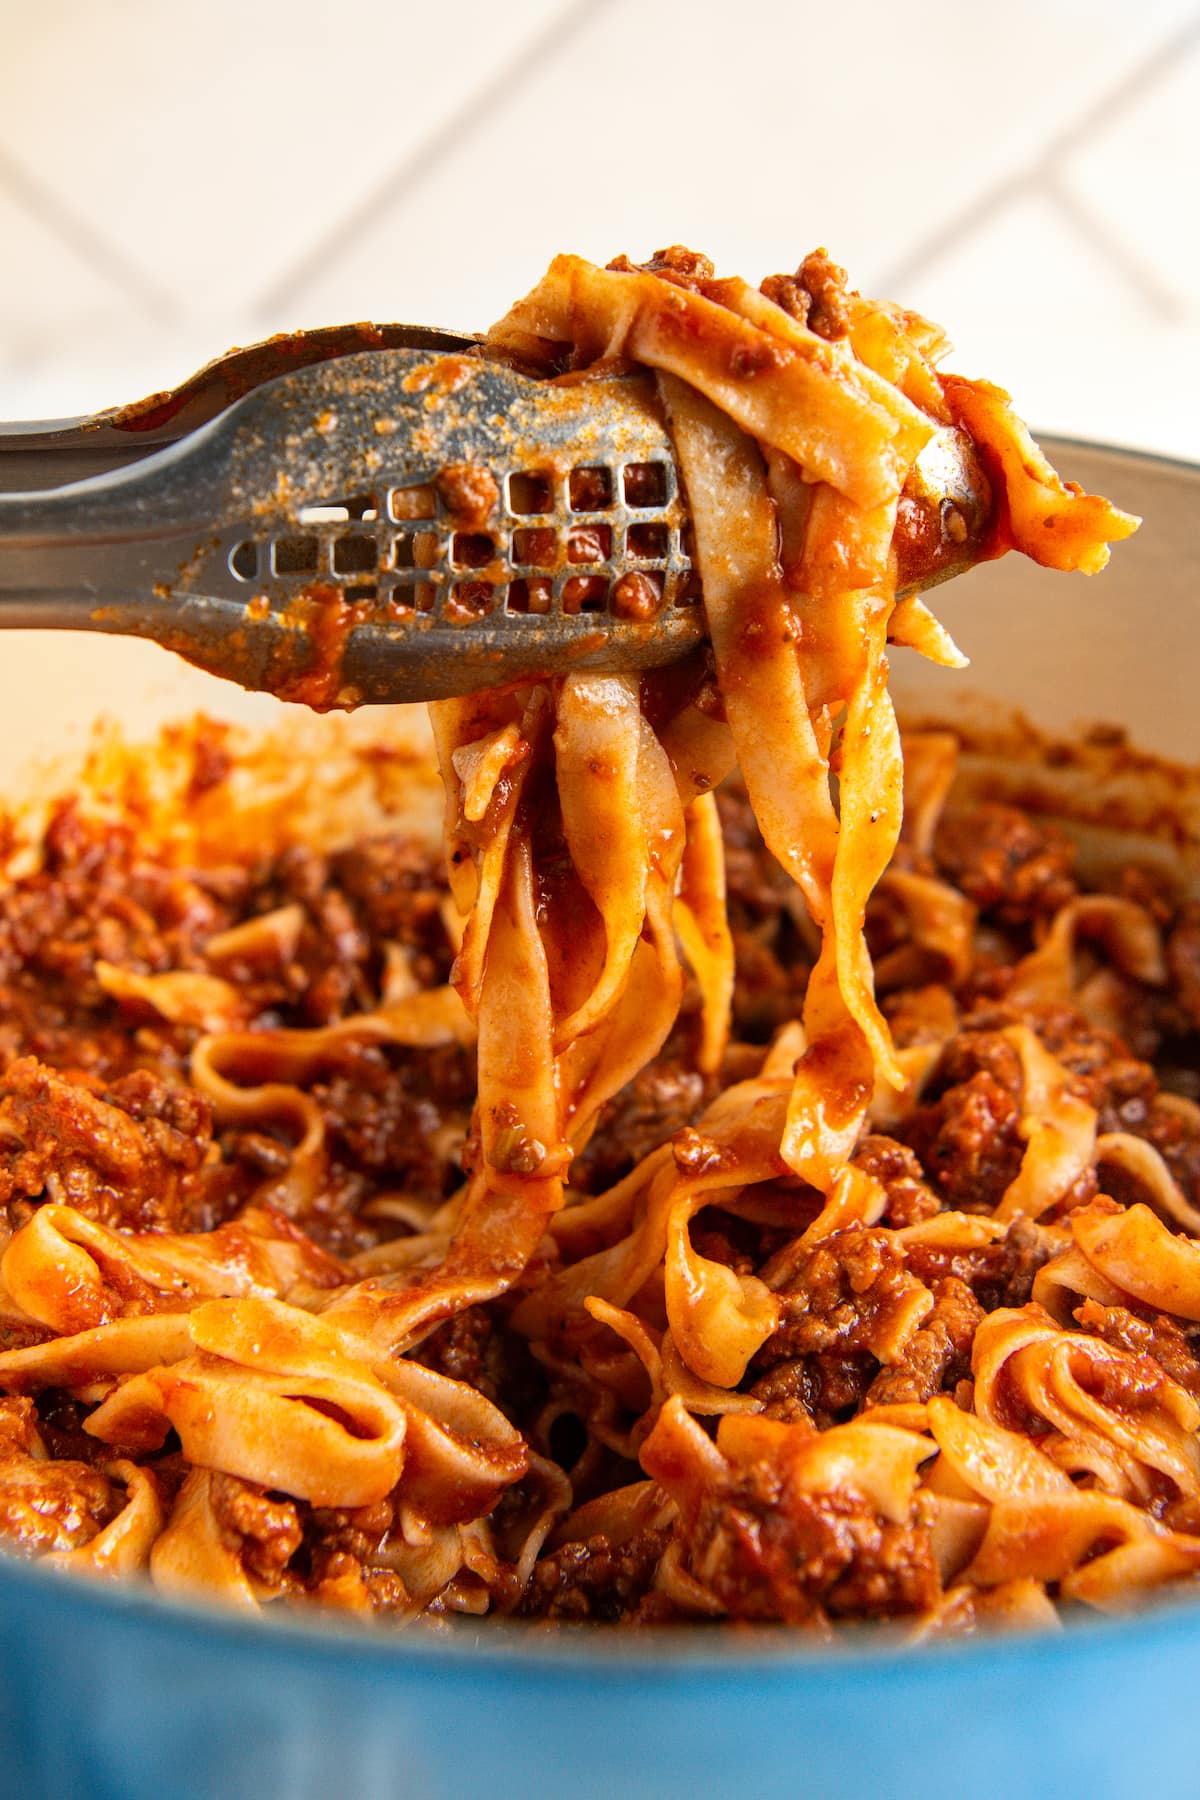 Using tongs to serve a portion of pasta with ragu spaghetti sauce.